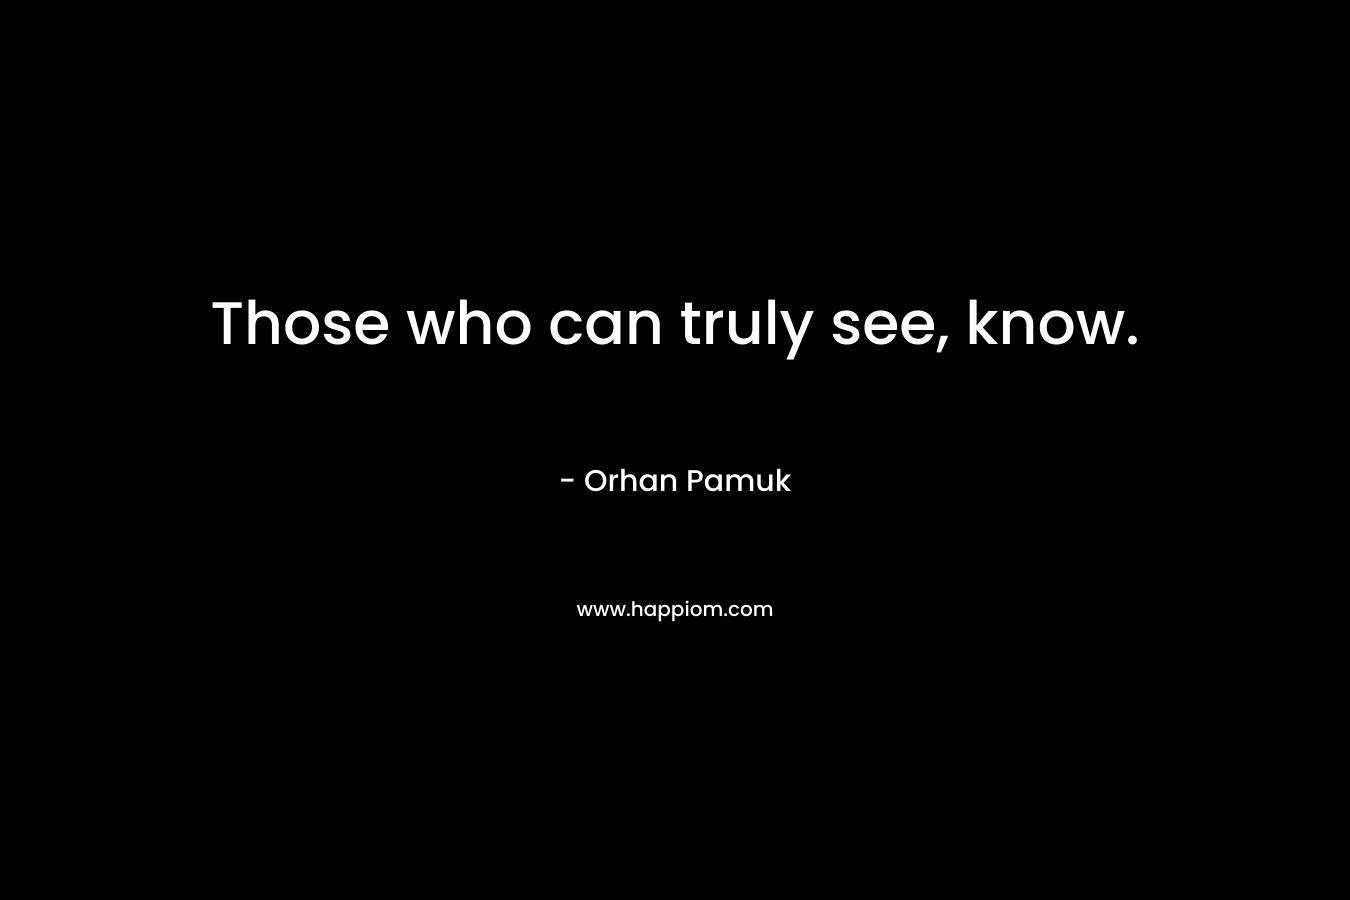 Those who can truly see, know. – Orhan Pamuk